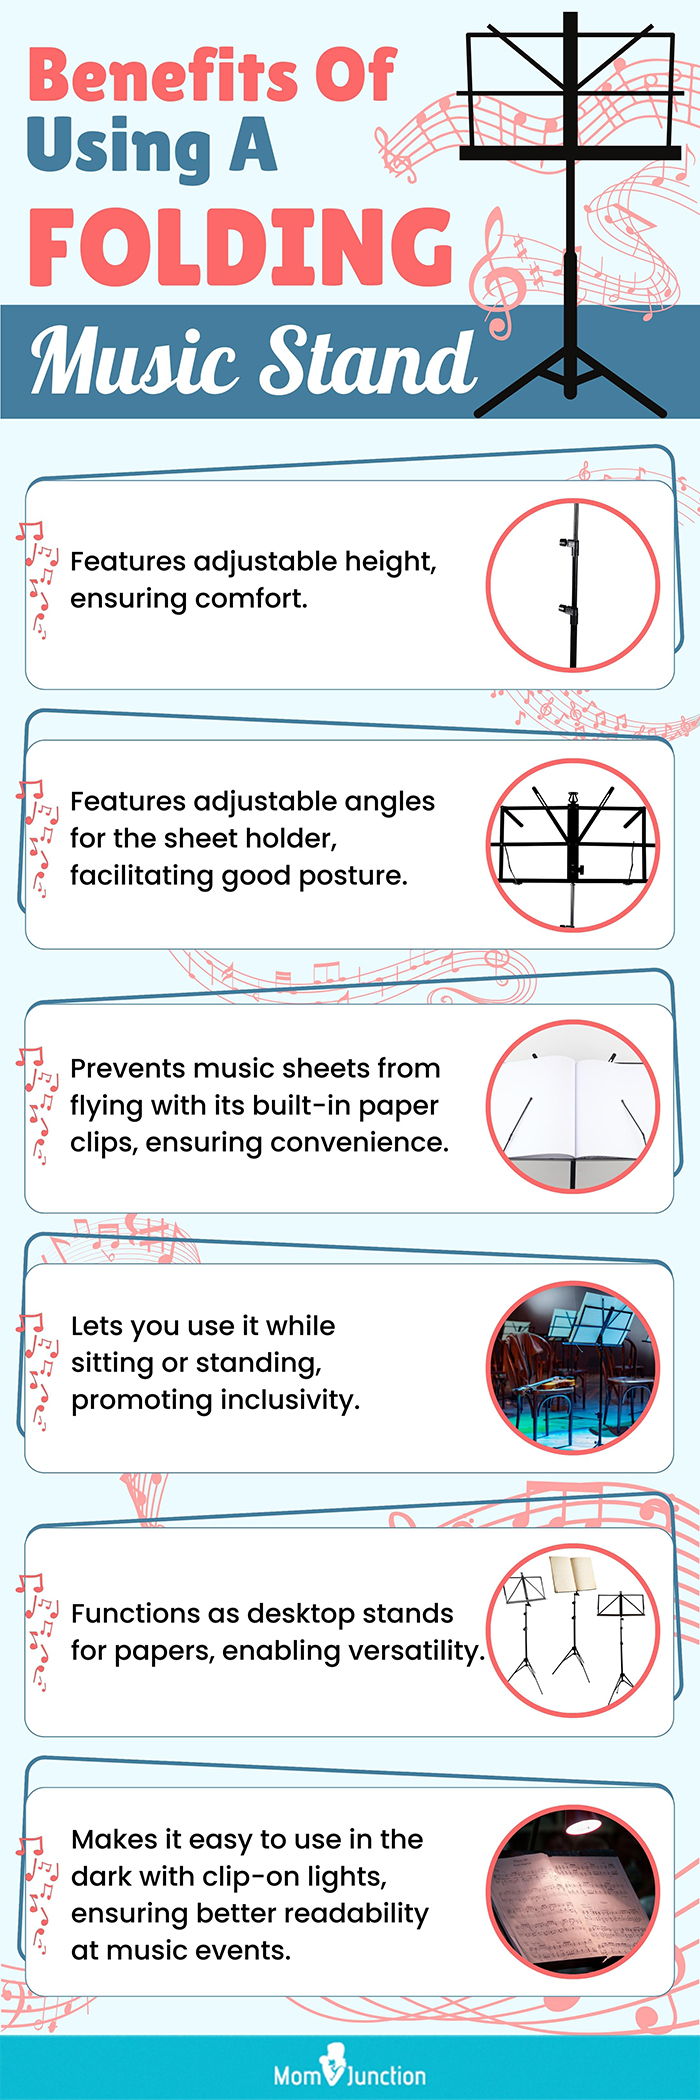 Benefits Of Using A Folding Music Stand (infographic)